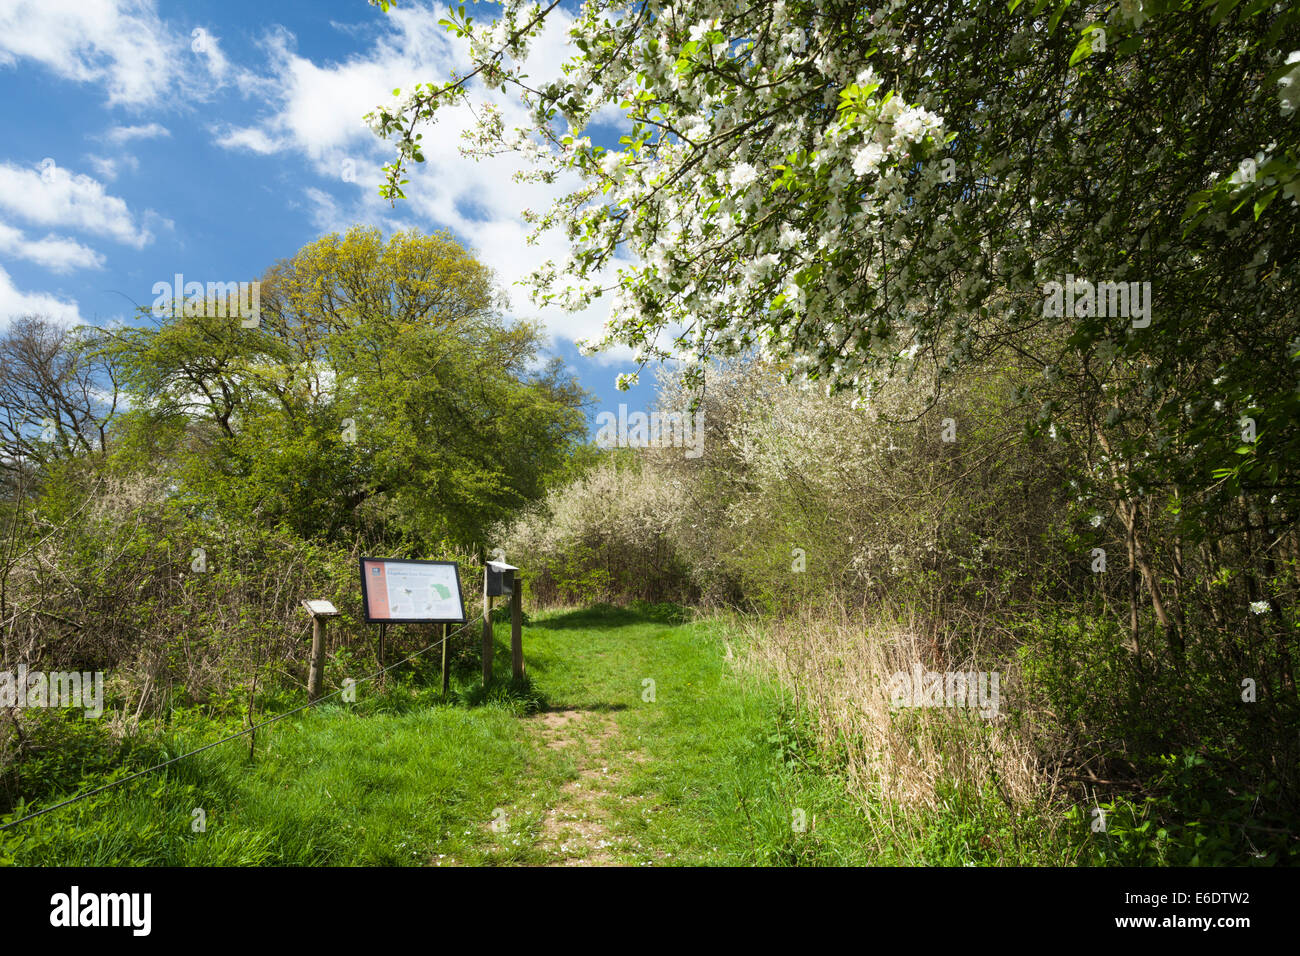 The entrance to Glapthorn Cow Pastures nature reserve with flowering crab apple tree and blackthorn scrub habitat in east Northamptonshire, England. Stock Photo